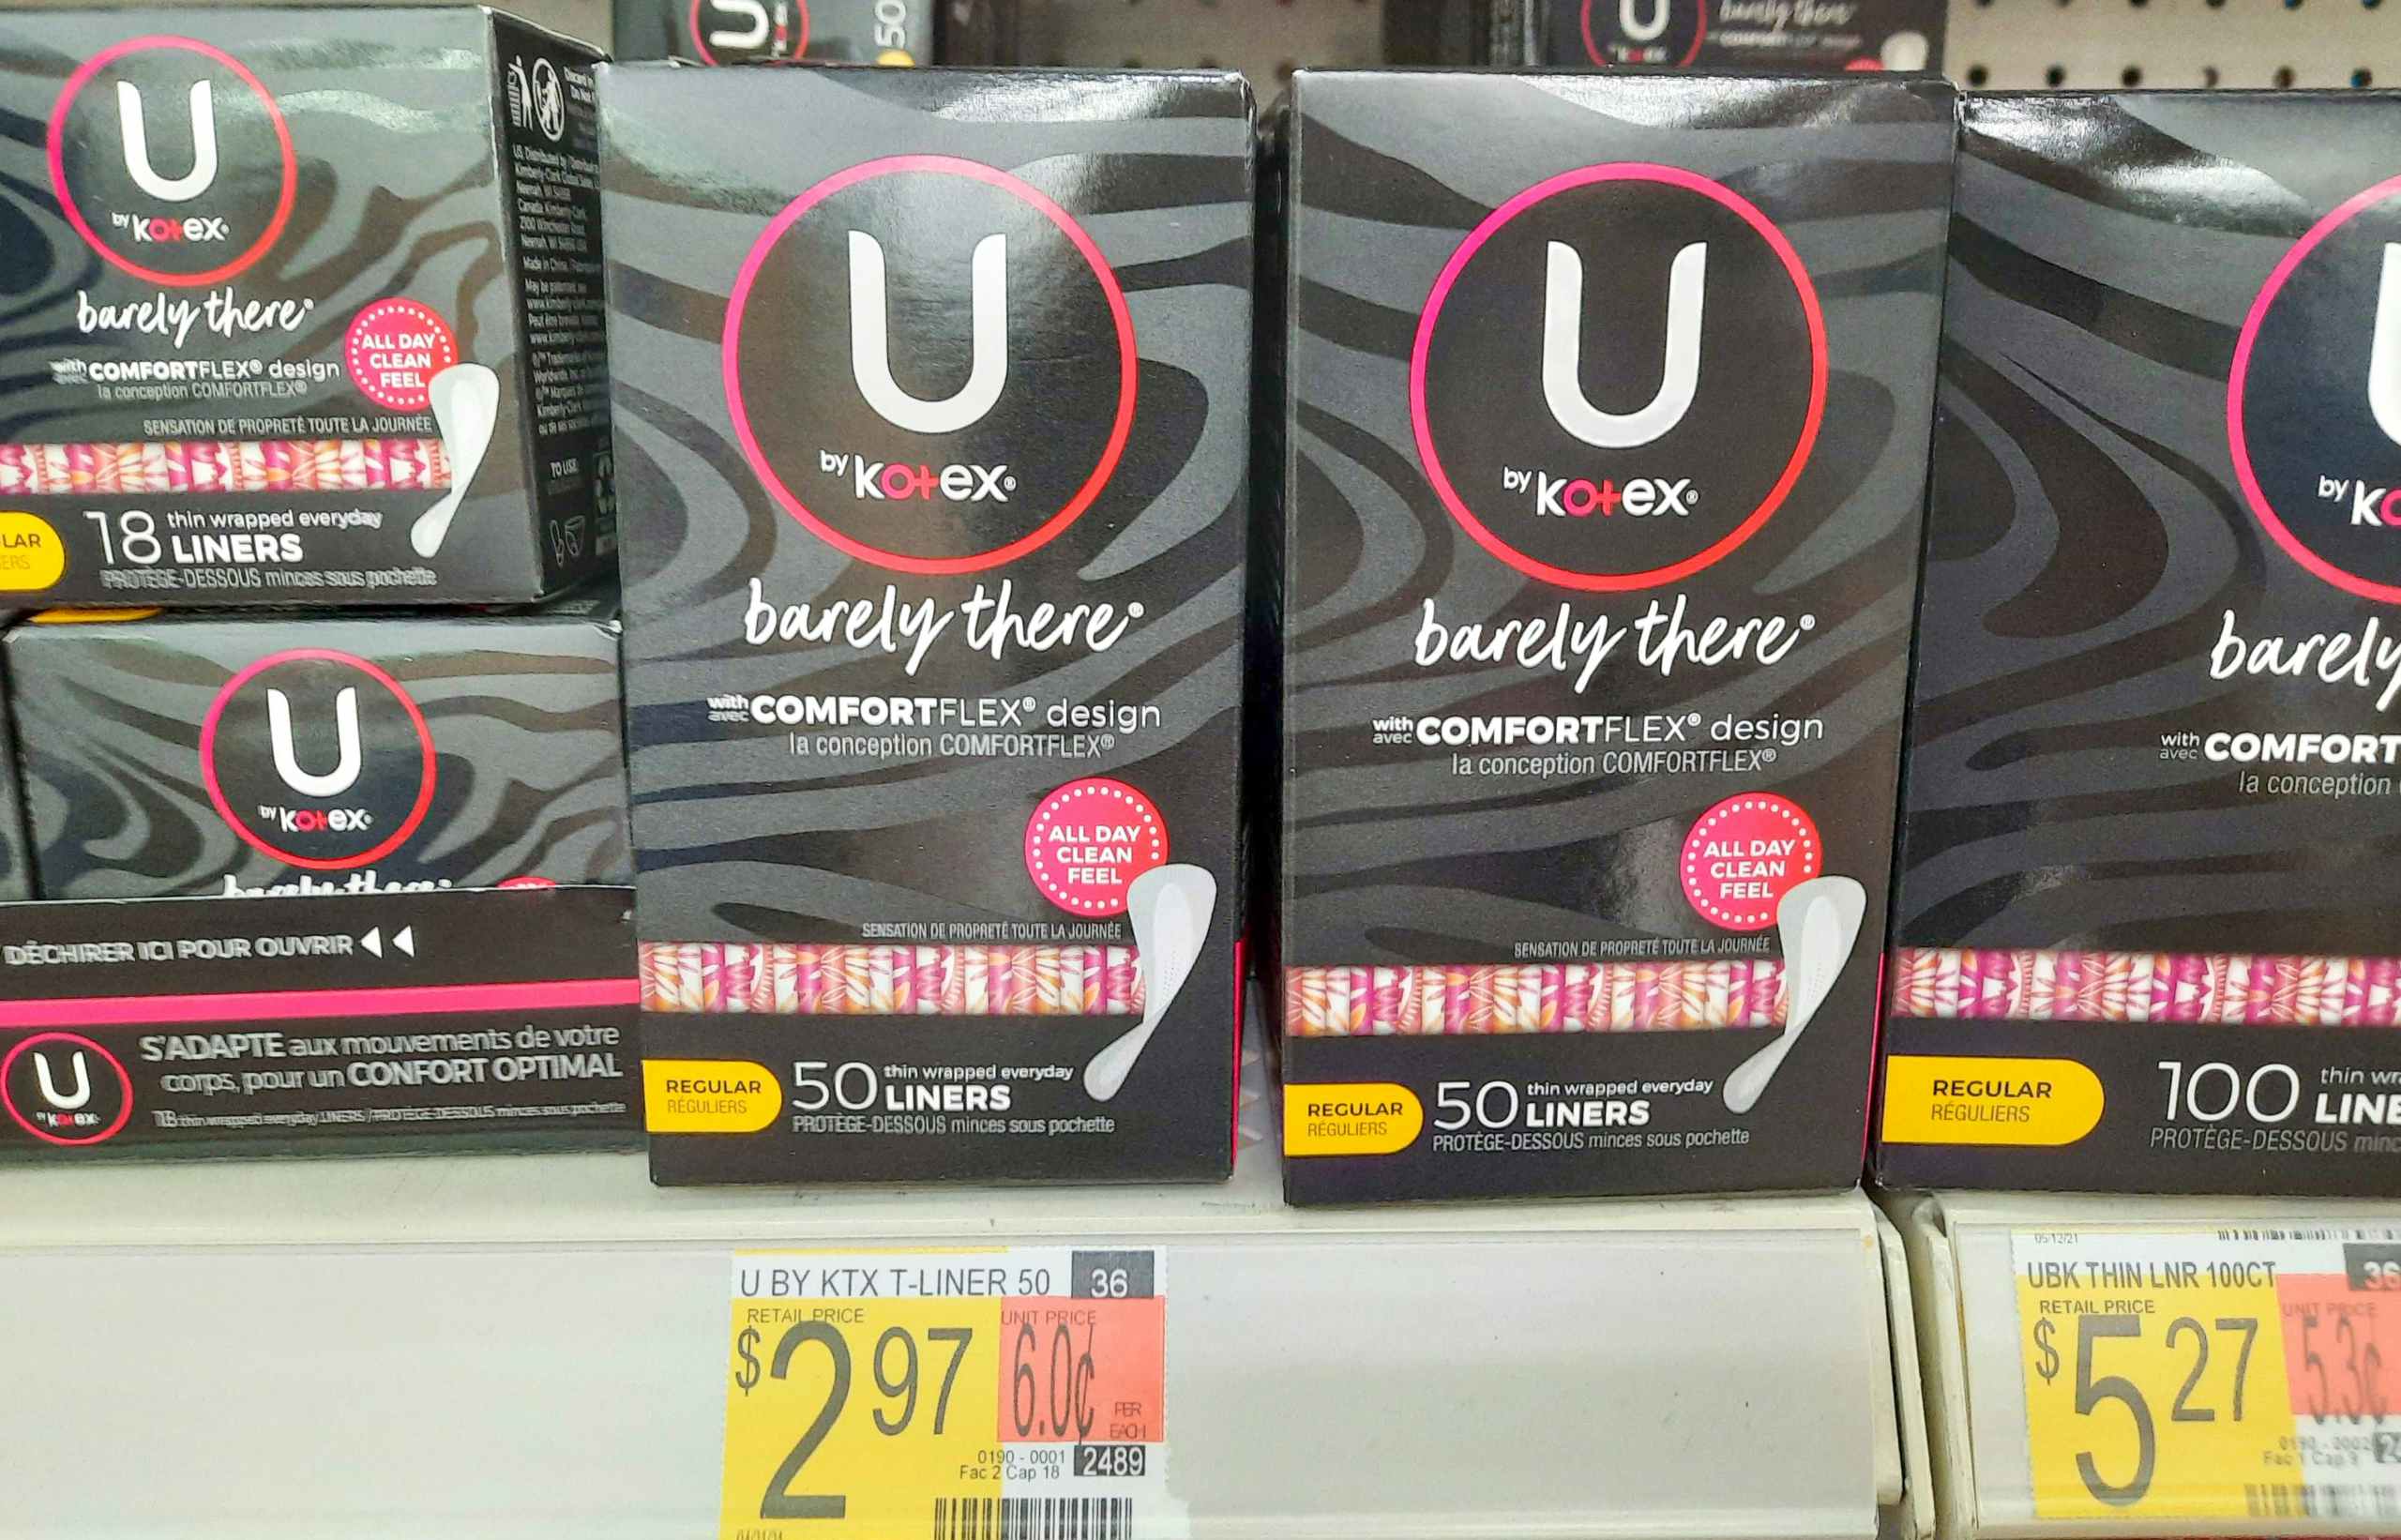 walmart-u-by-kotex-barely-there-50-count-liners-2021